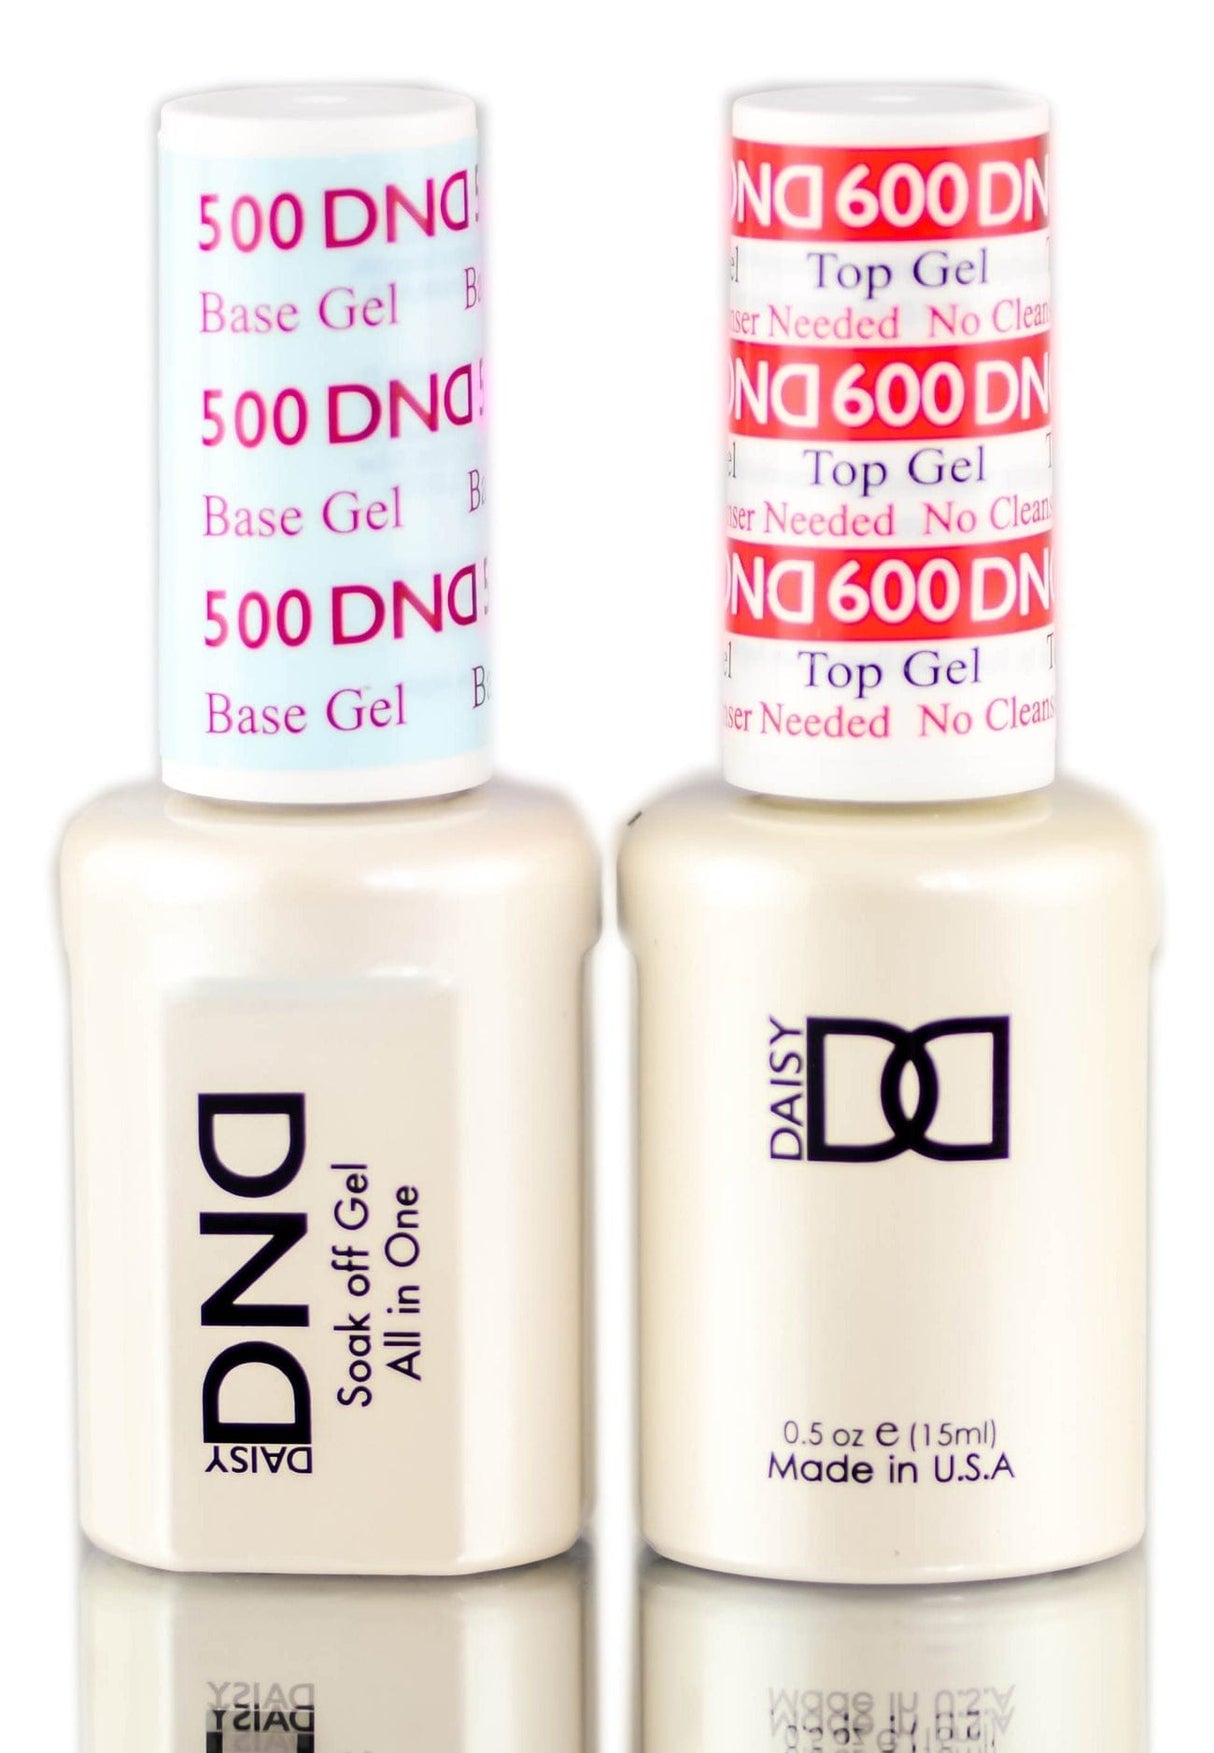 DND Duo Gel - 600 TOP + 500 BASE - Jessica Nail & Beauty Supply - Canada Nail Beauty Supply - Top Base Duo